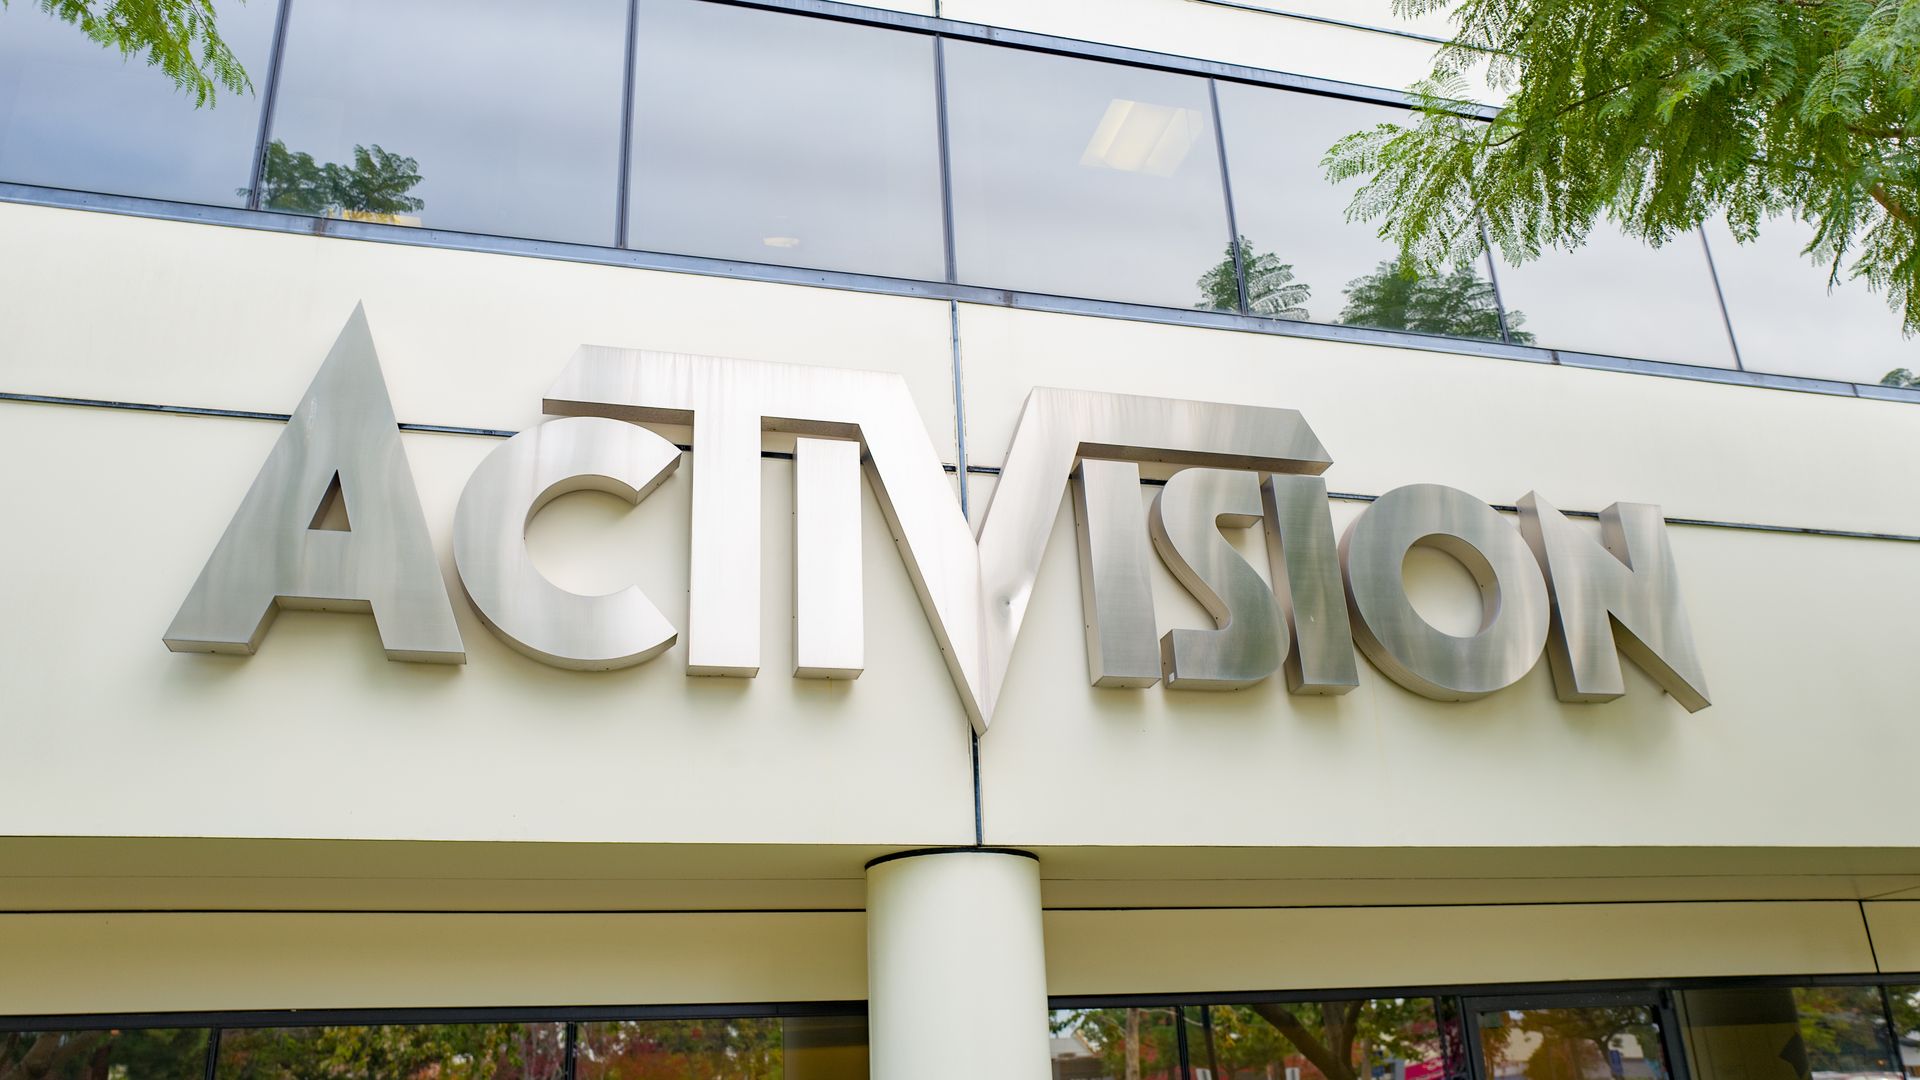 Photo of a building adorned with Activision's logo